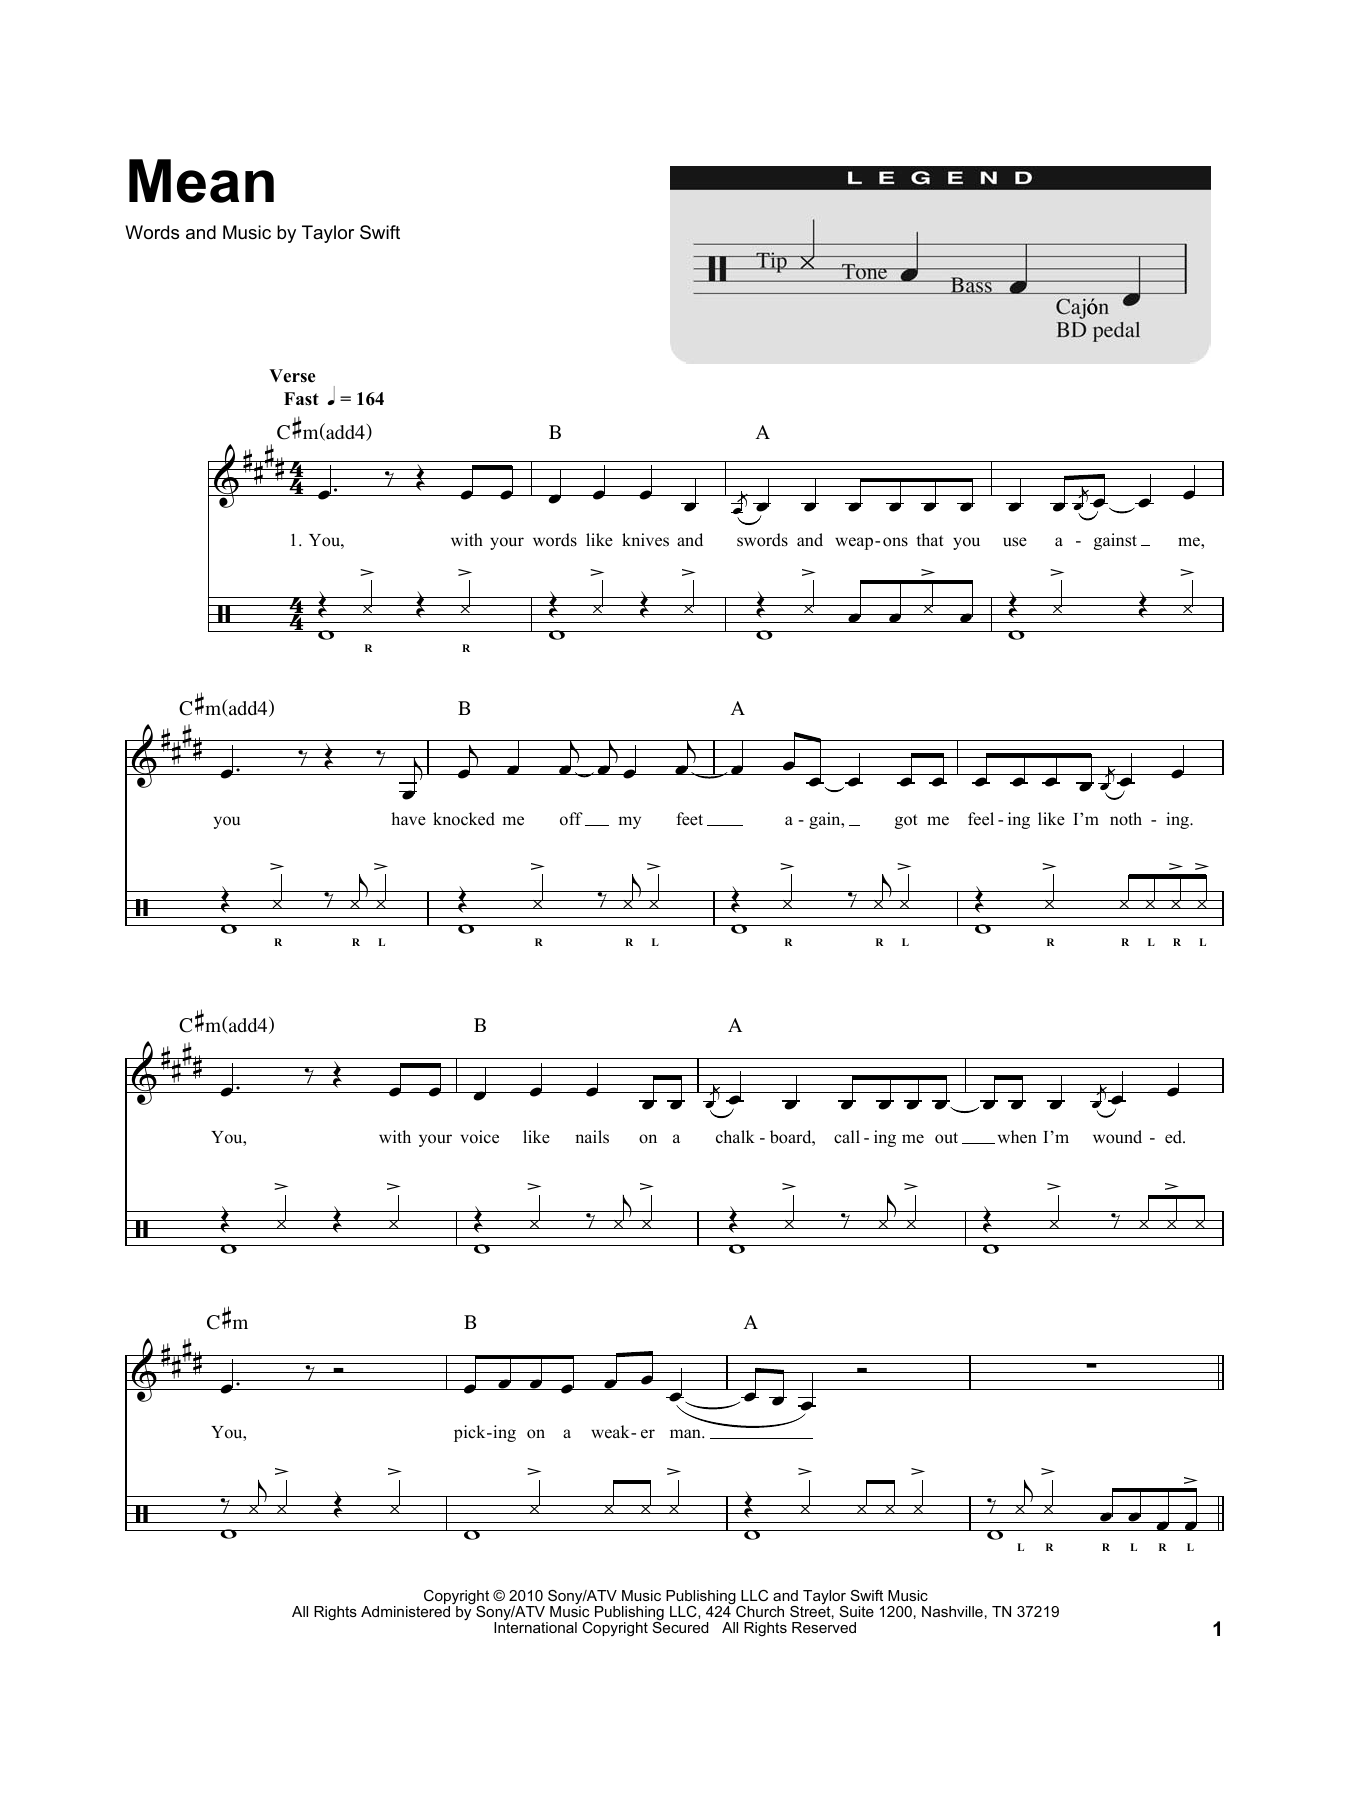 Download Taylor Swift Mean Sheet Music